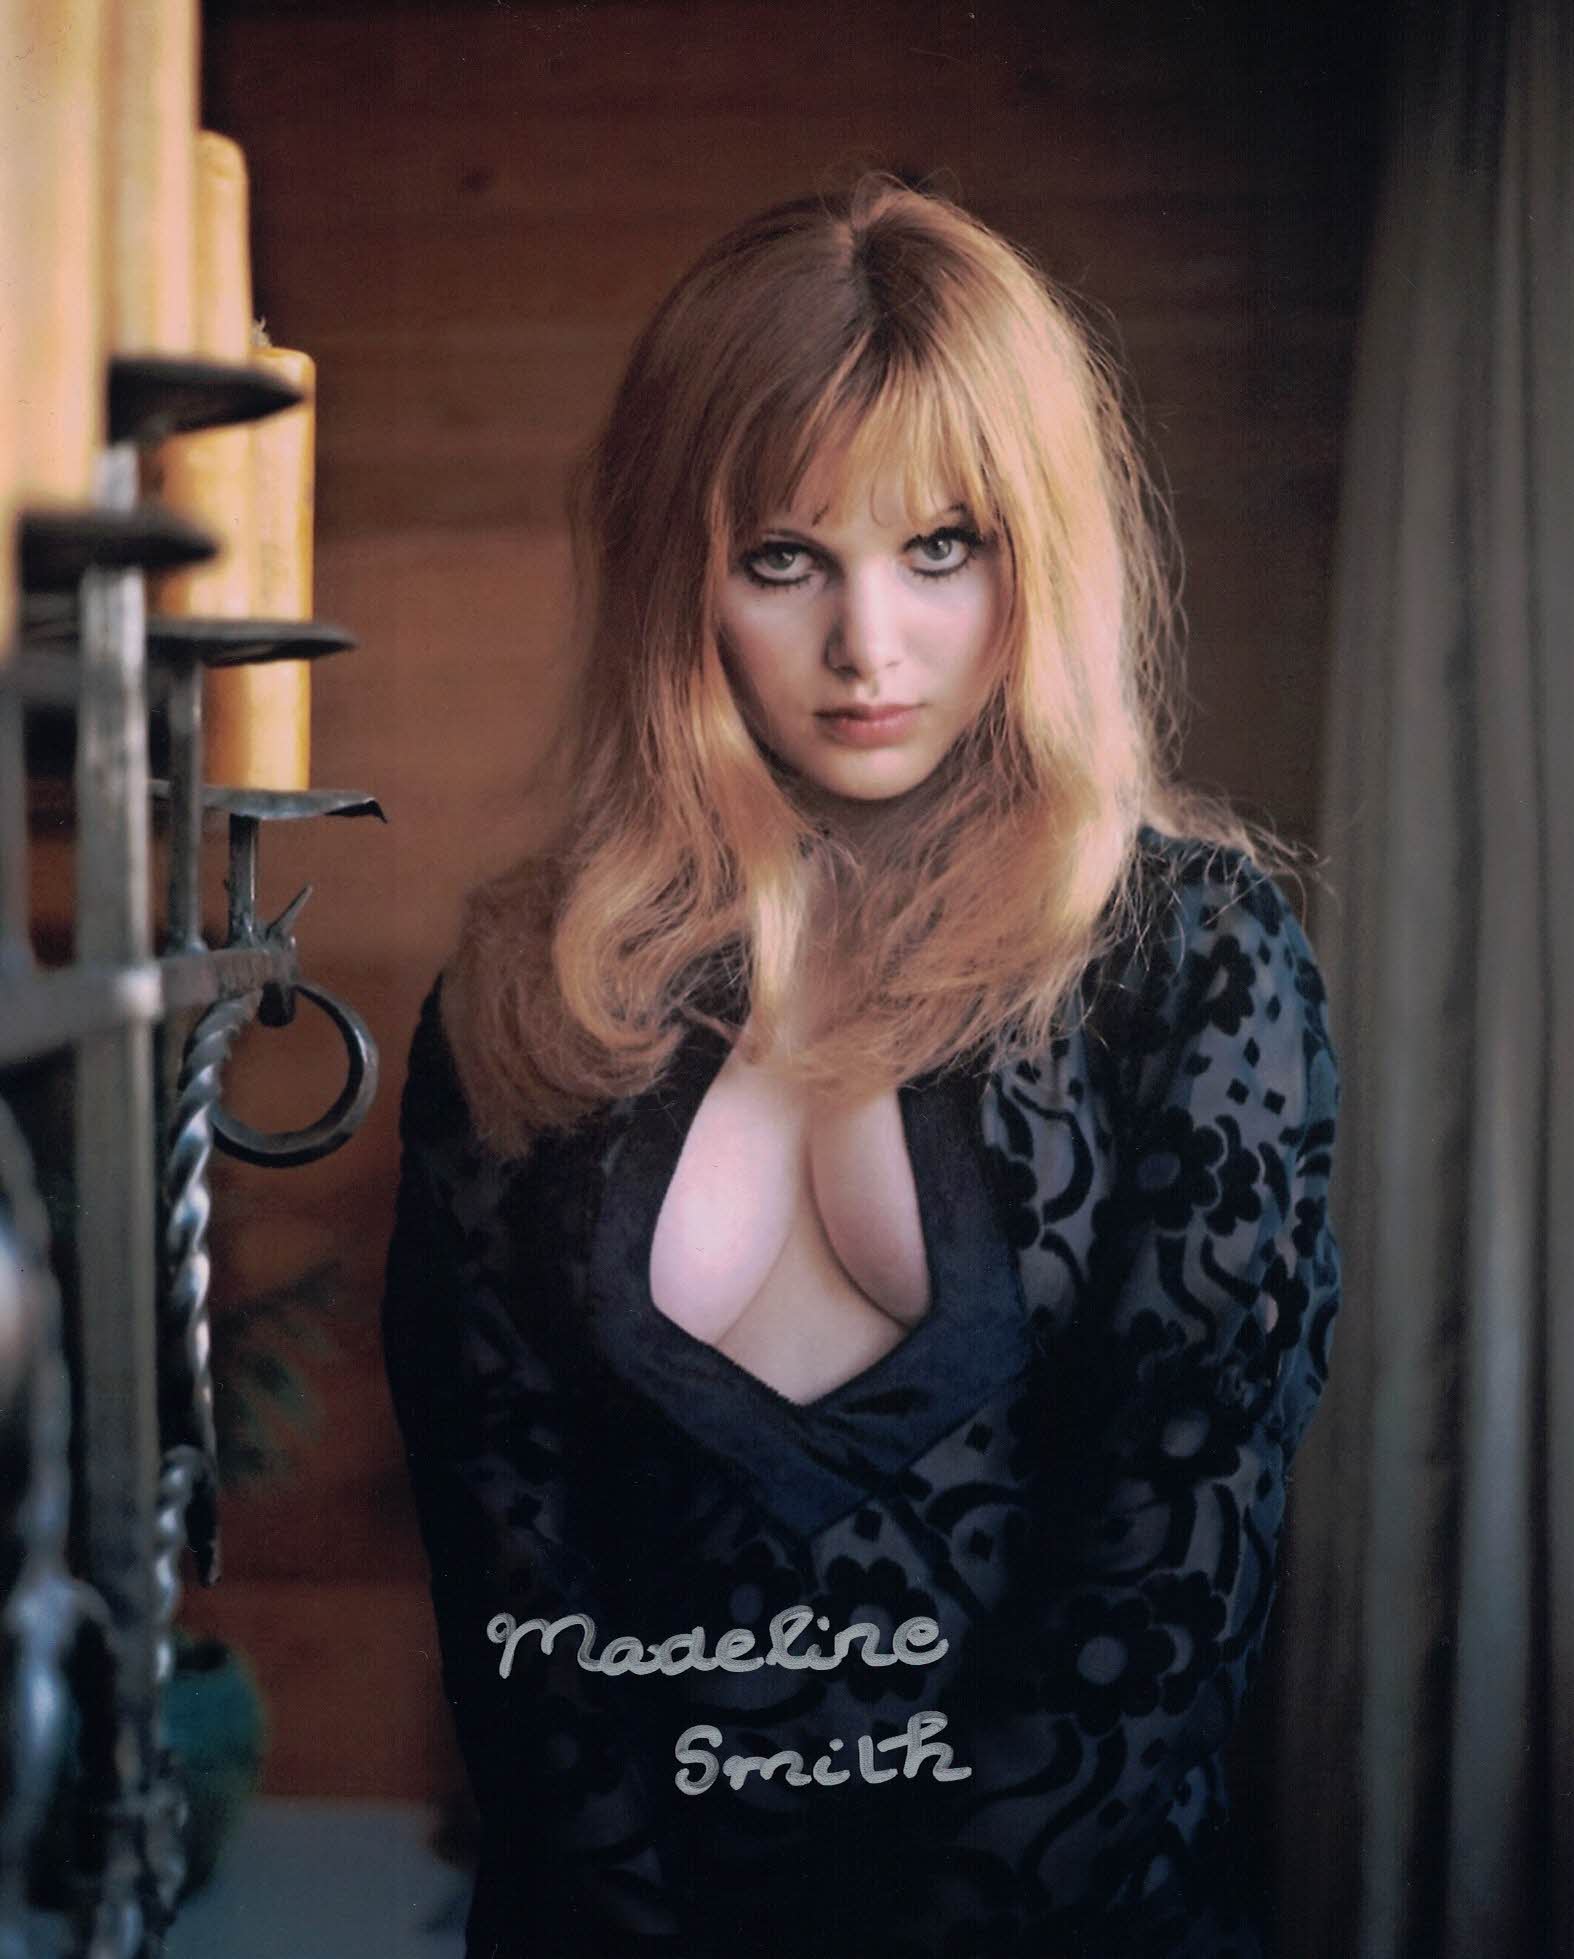 MADELINE SMITH - James Bond and Hammer actor - hand signed 10 x 8 photo